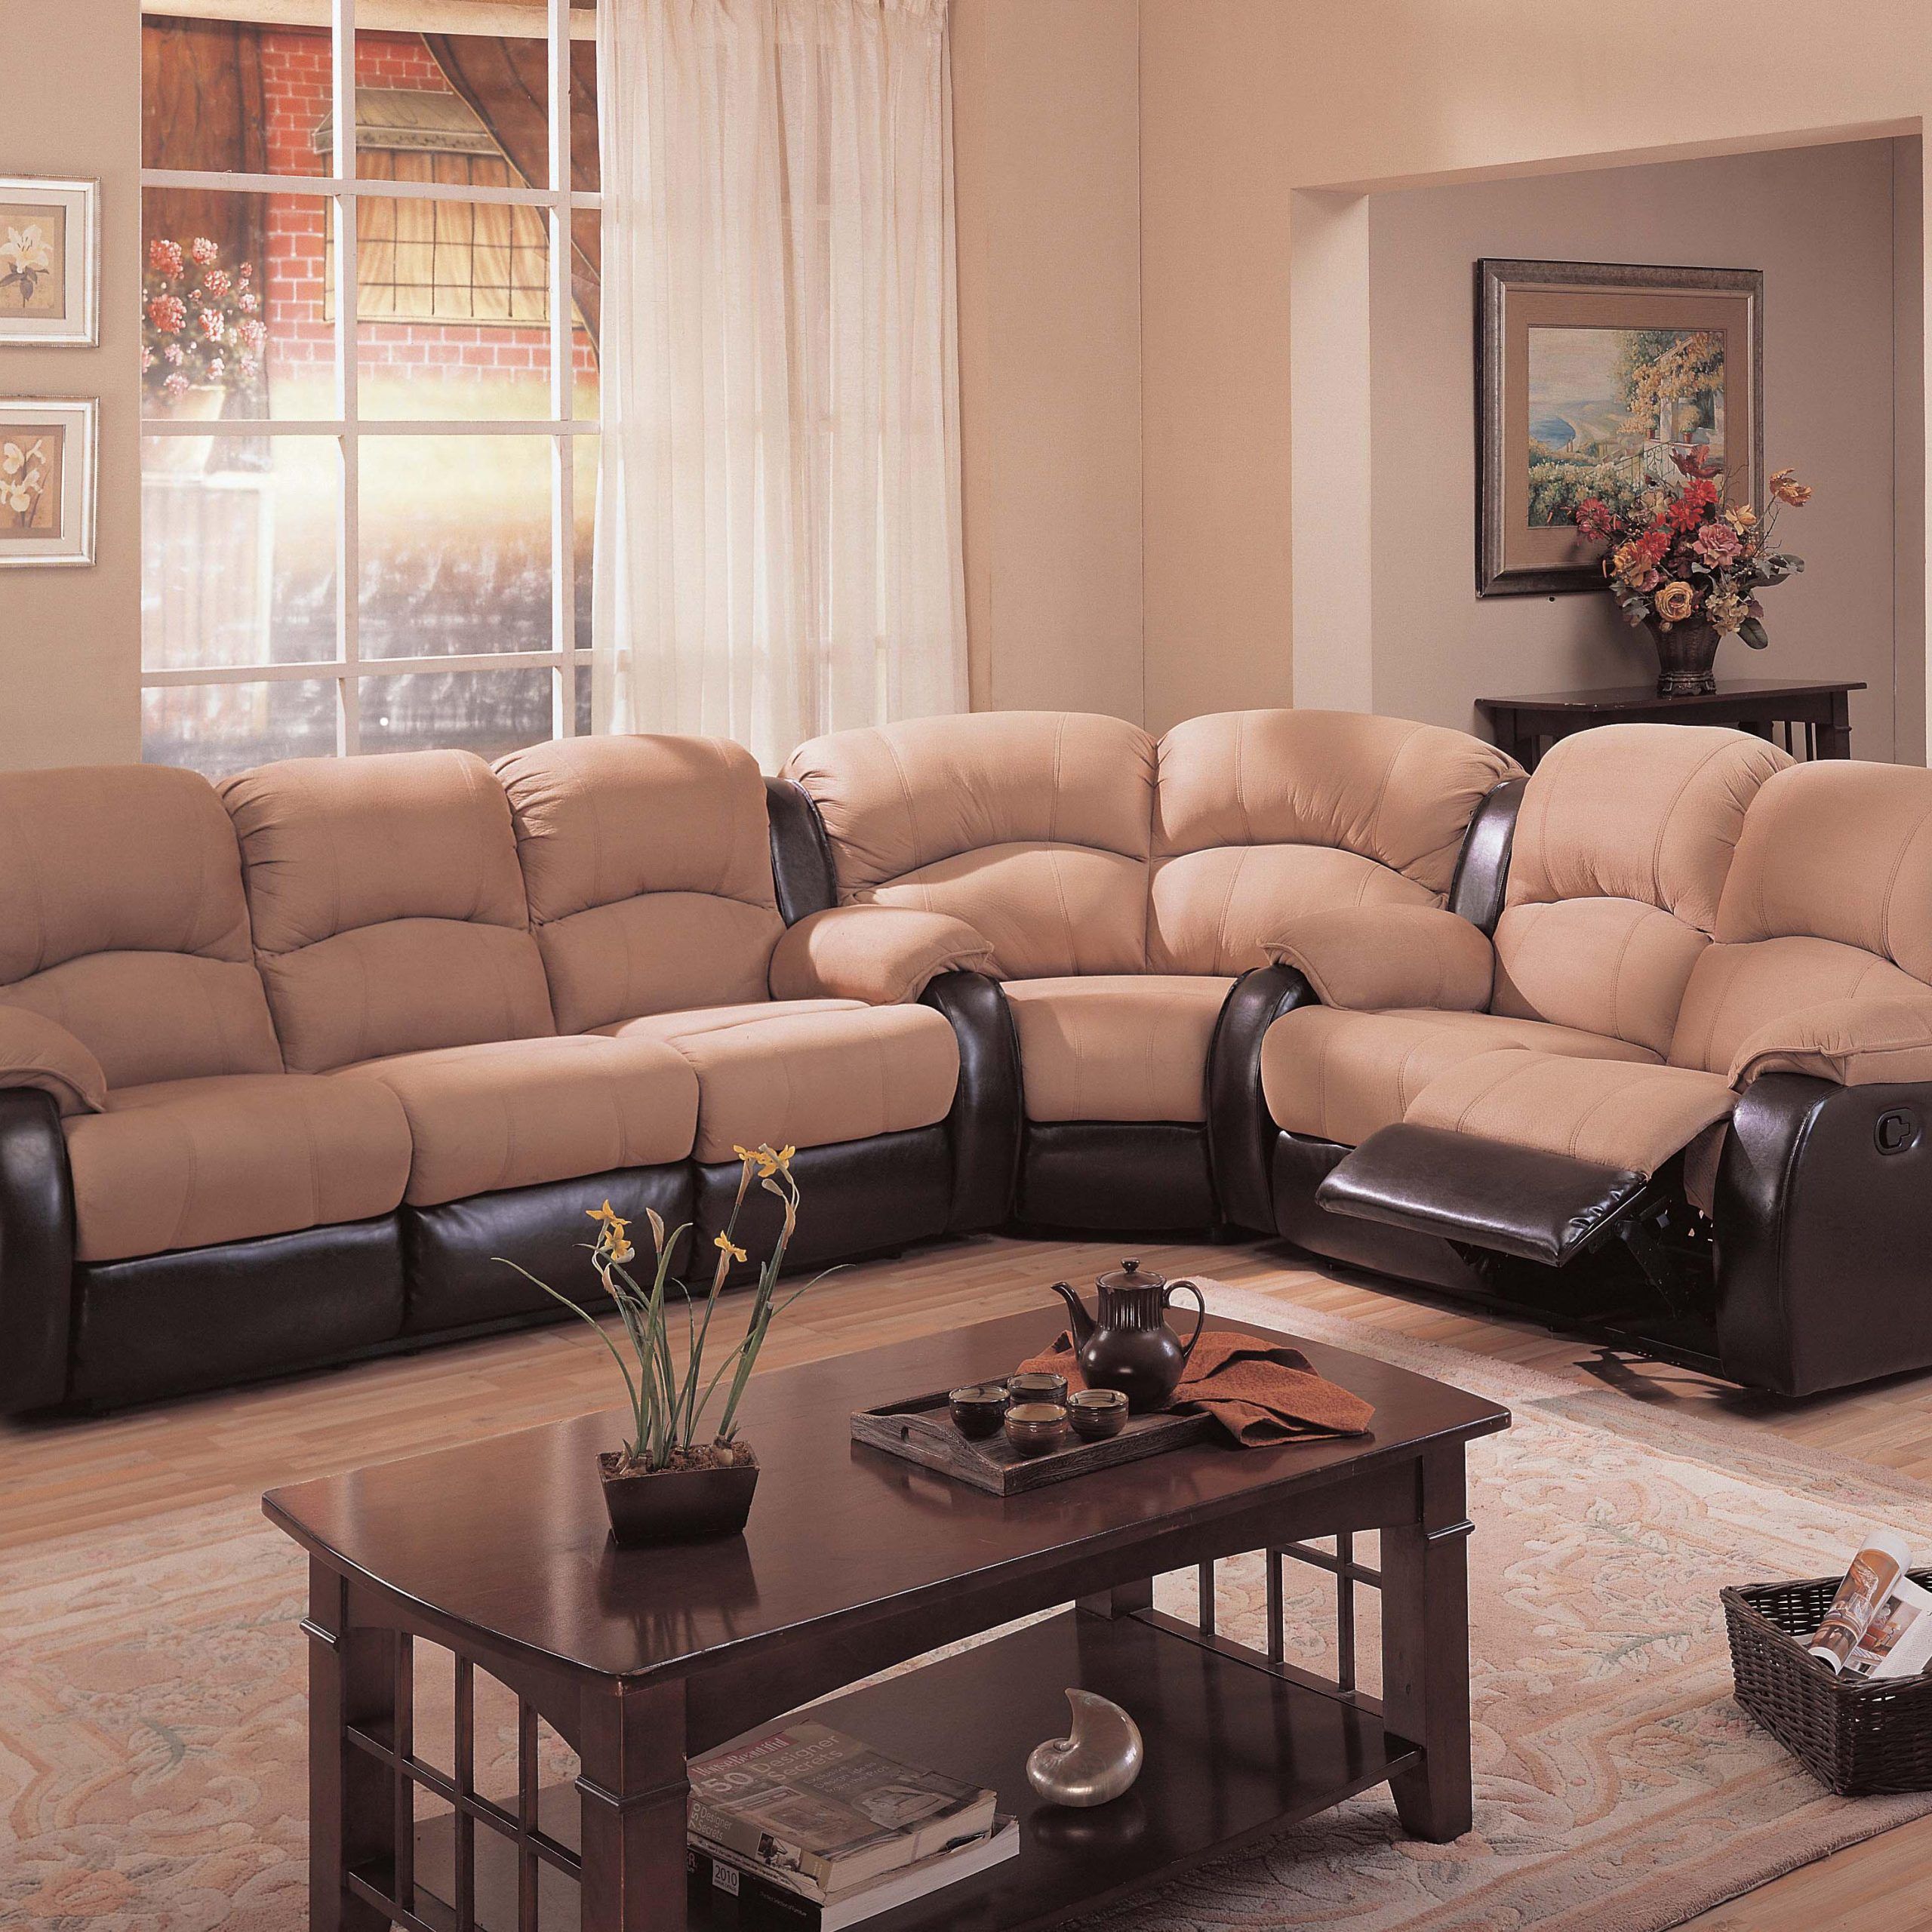 Microfiber Sectional Couch With Recliner: Chic Features For Your Home Throughout 2 Tone Chocolate Microfiber Sofas (Gallery 12 of 20)